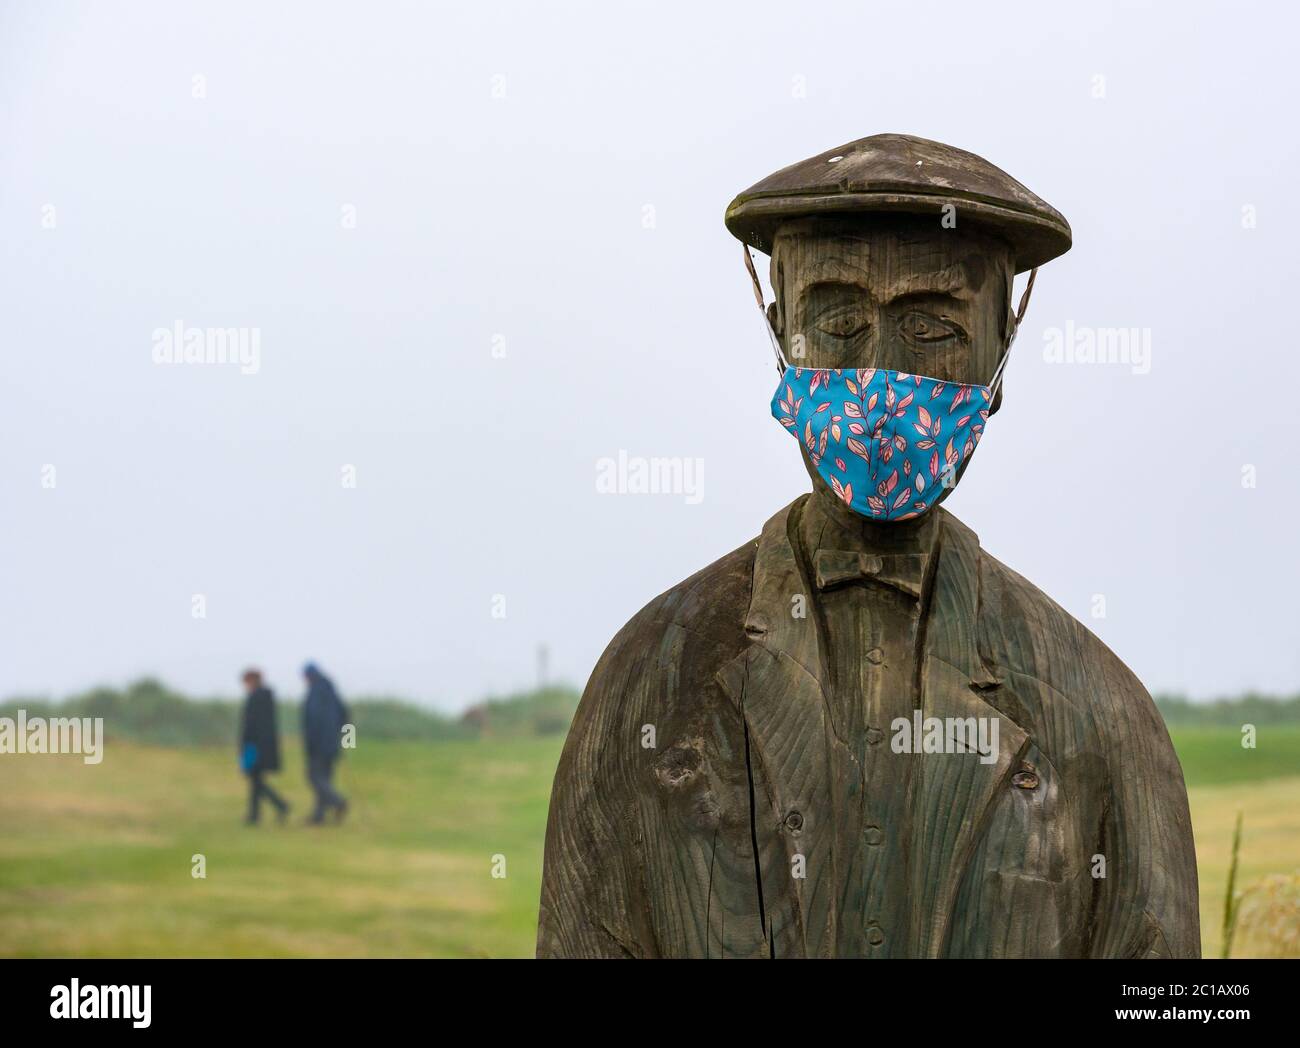 North Berwick, East Lothian, Scotland, United Kingdom, 15th June 2020. UK Weather: thick fog continues for the 3rd day in East Lothian with few people in the popular seaside town. A wooden statue of Ben Sayers, a 19th century professional golf player by Ed Robinson, has acquired a colourful face mask on Rotary Way on Elcho Green Stock Photo